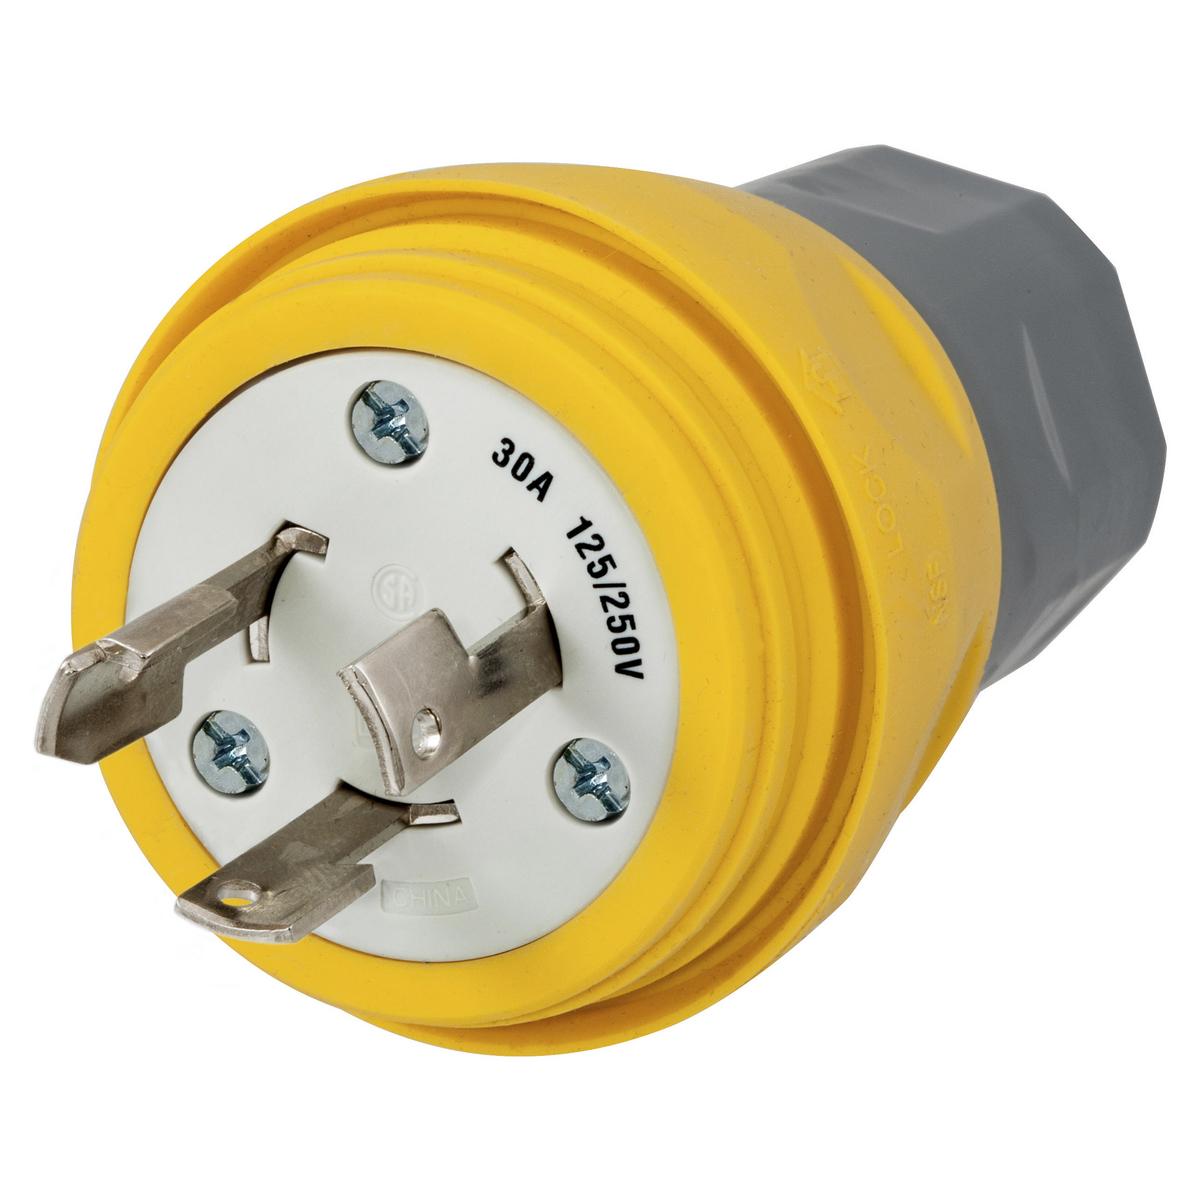 Hubbell HBL28W08 Watertight Devices, Twist-Lock® Plug, 30A, 125/250V AC, 3 Pole, 3 Wire, Thermoplastic elastomer, NON-NEMA, Yellow  ; Smooth body design minimizes collection points simplifying the wash down process ; Strain relief nut always seals on the body, minimizing 